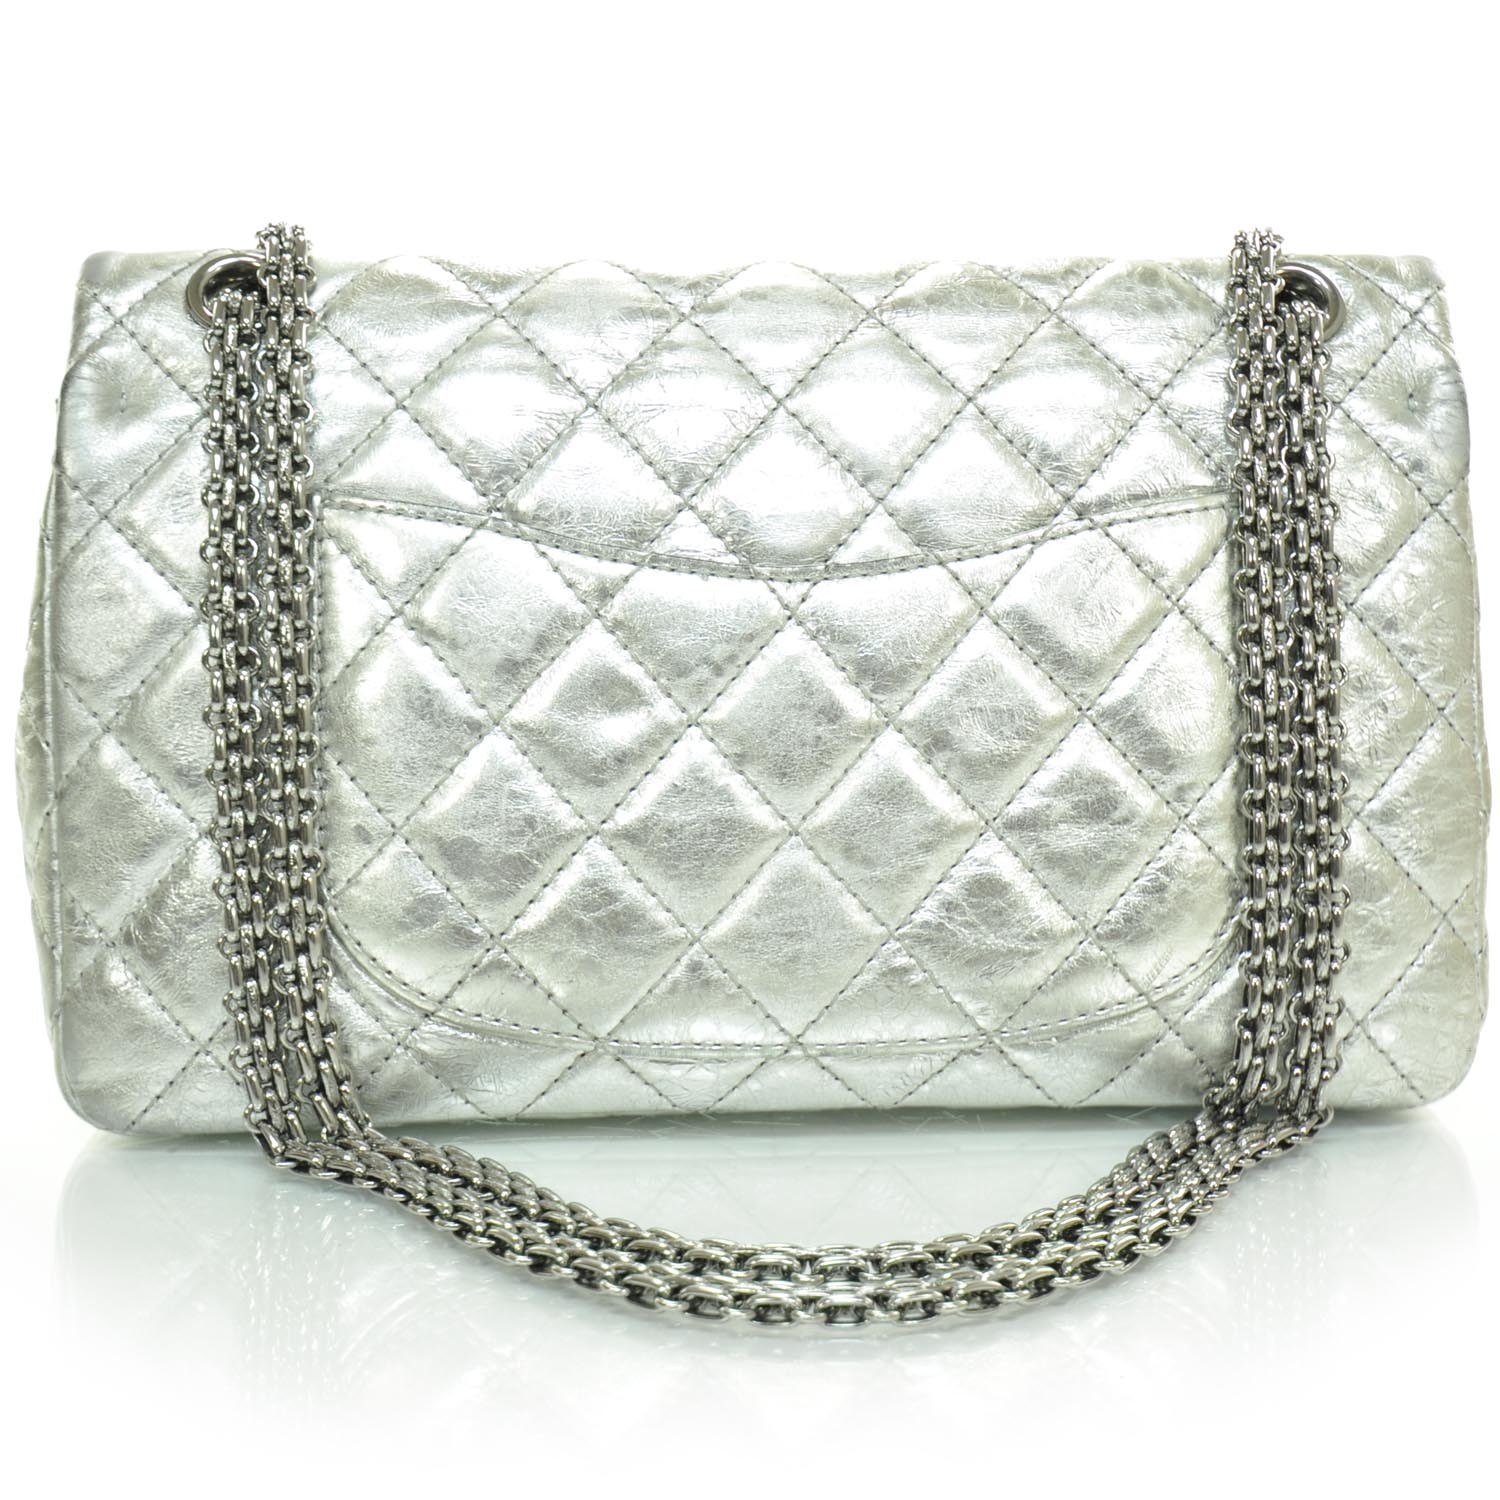 CHANEL Distressed Leather 2.55 Reissue 226 Flap Silver 22984